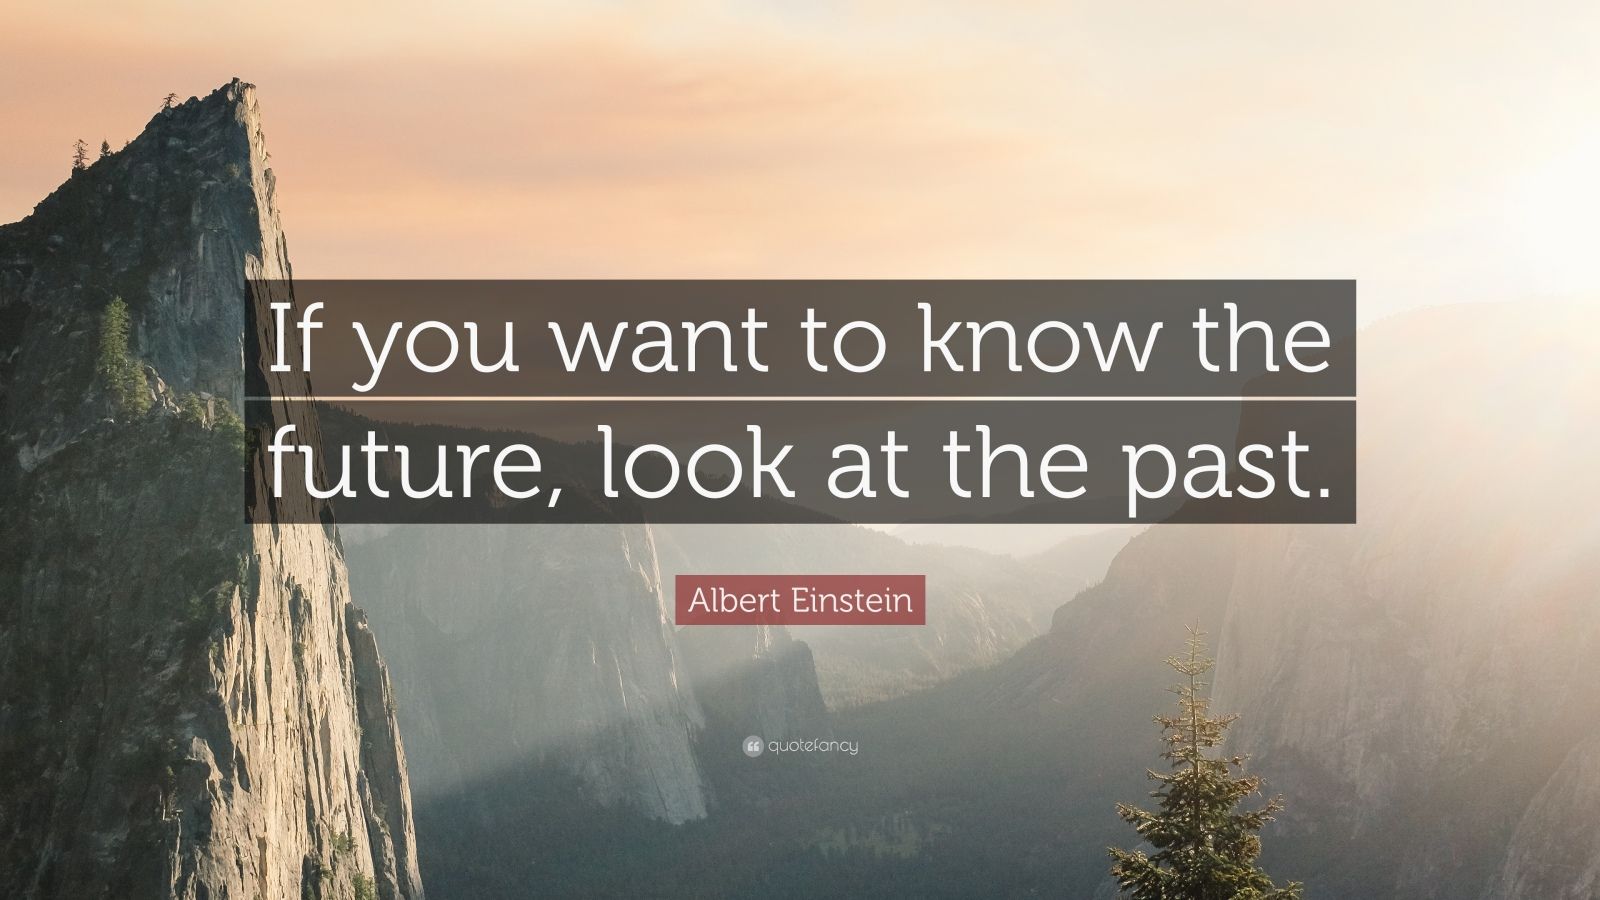 Albert Einstein Quote: “If you want to know the future, look at the